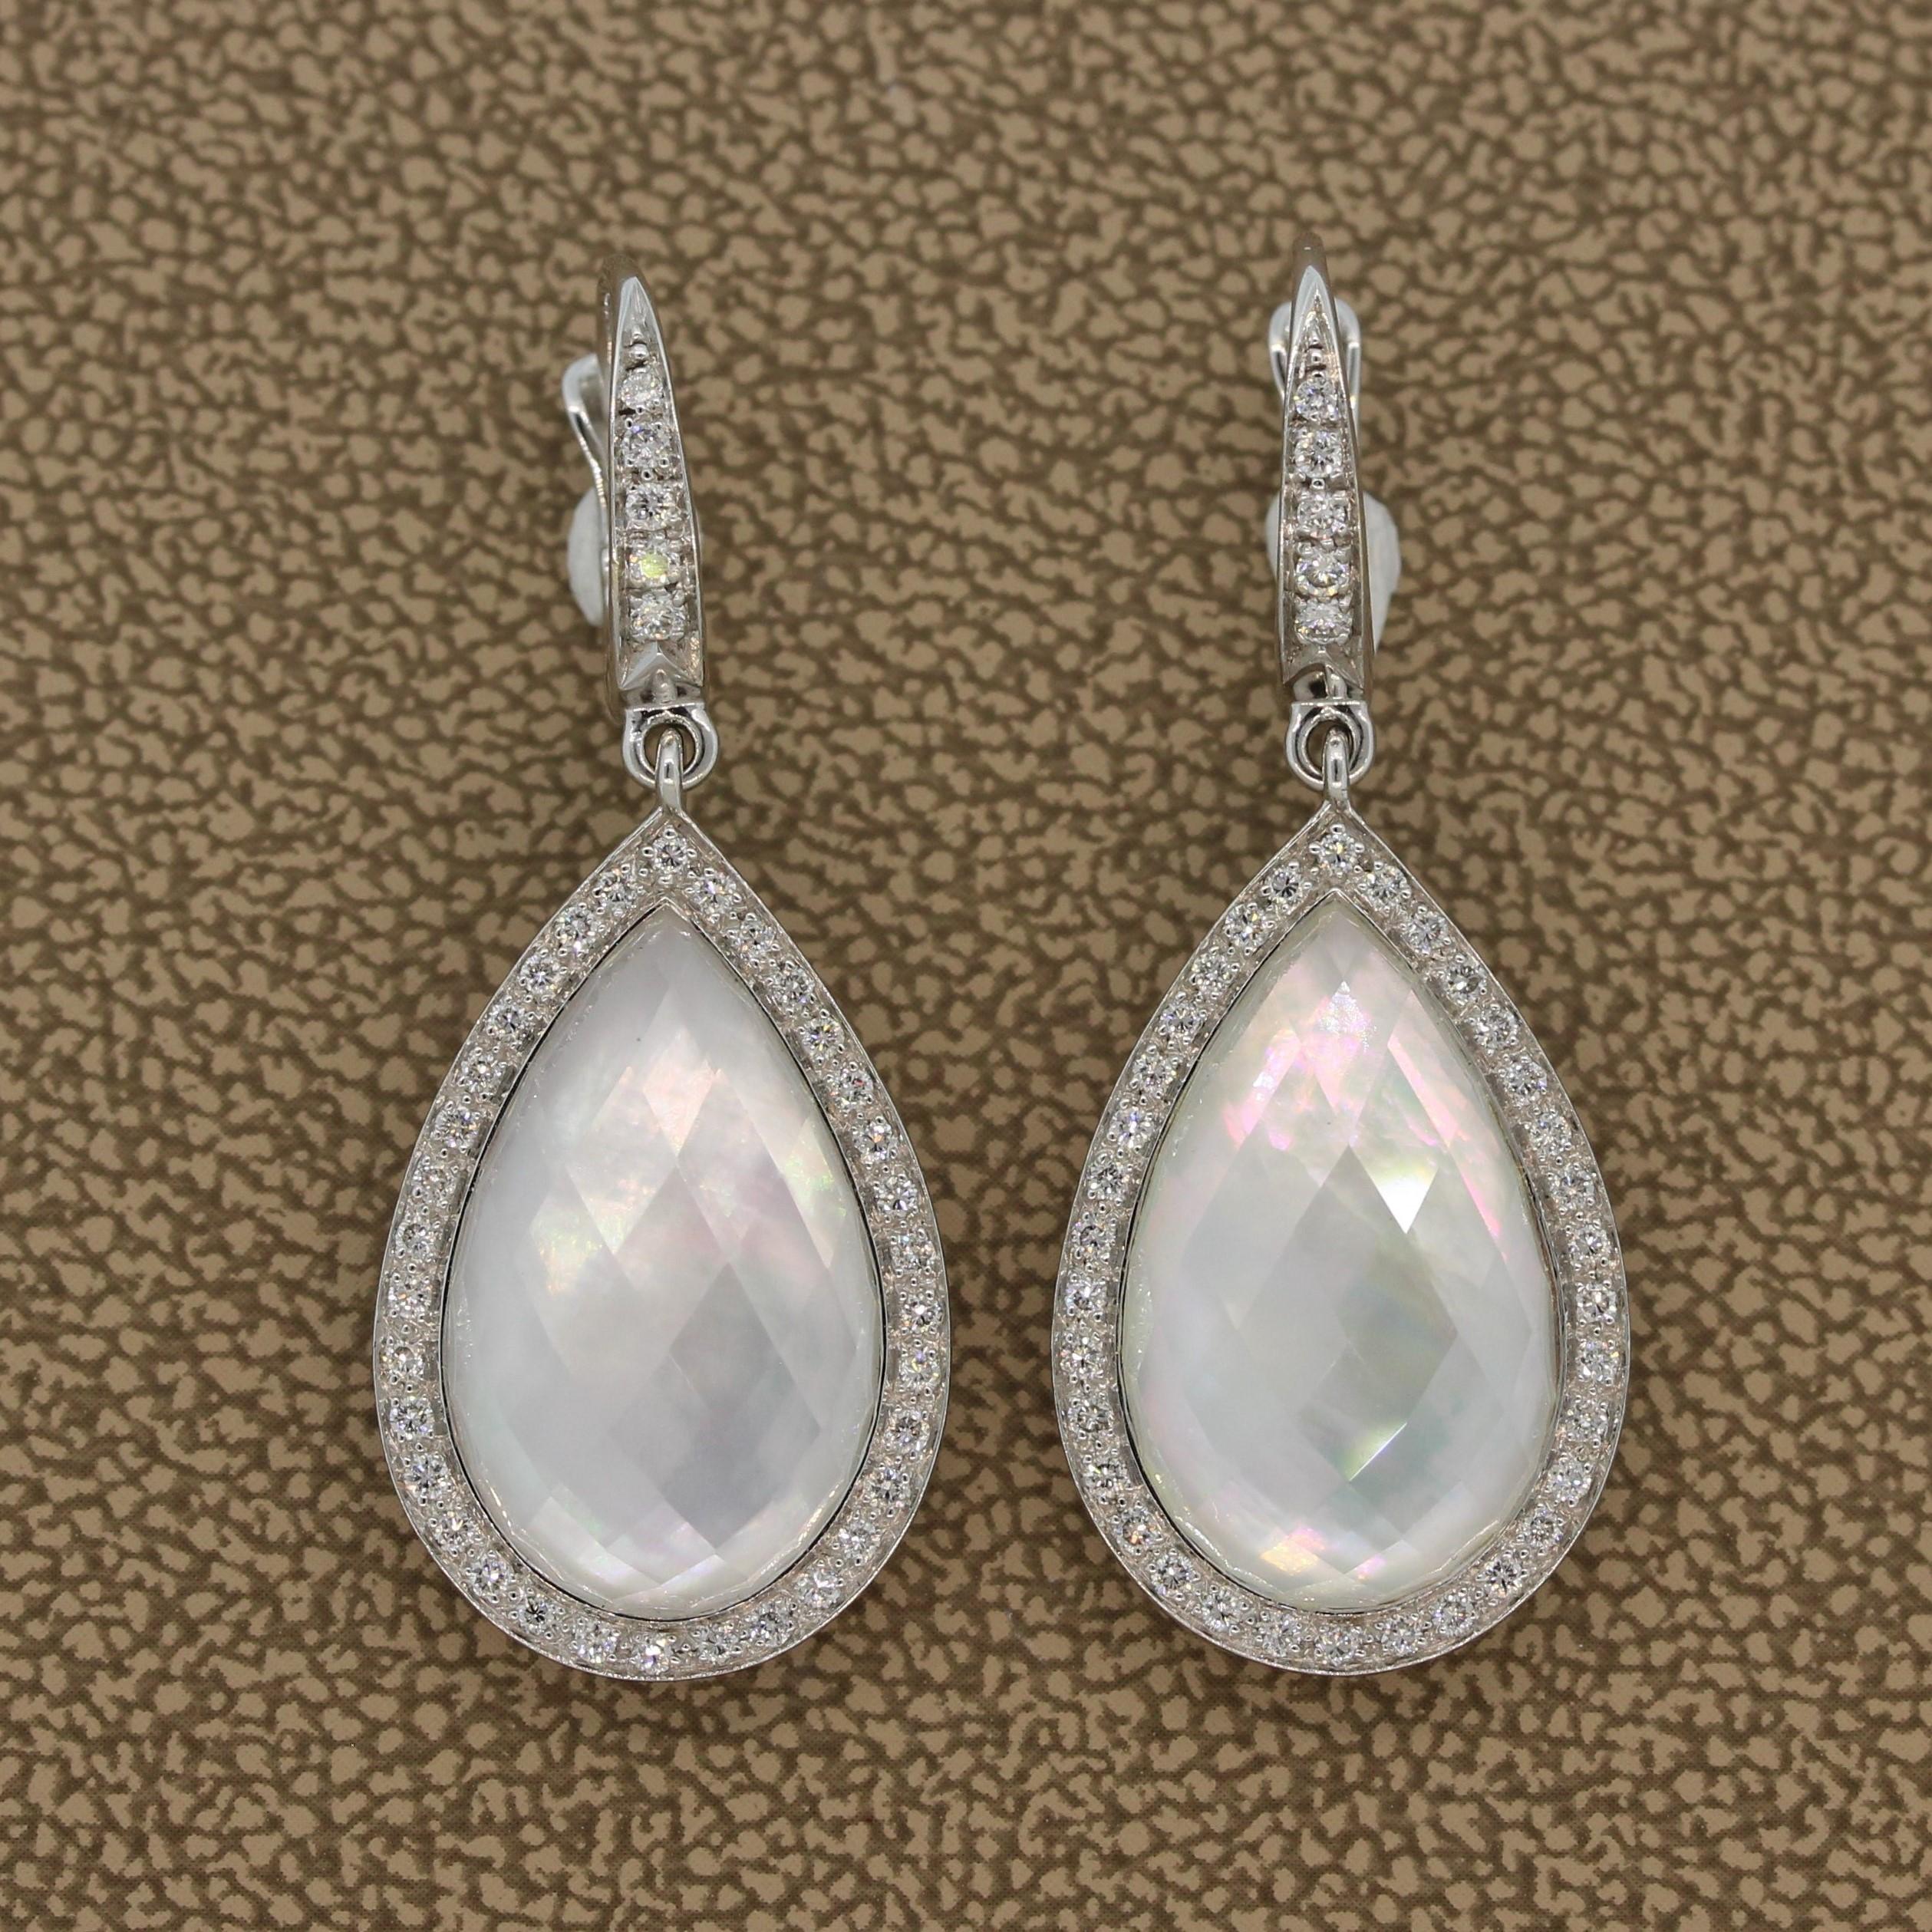 These bright and vibrant drop earrings feature 13.76 carats of  quartz with 4.49 carats of mother of pearl underneath the checkerboard quartz which adds rainbow hues to the gemstones. The pear shape quartz and mother of pearl are haloed by 0.54